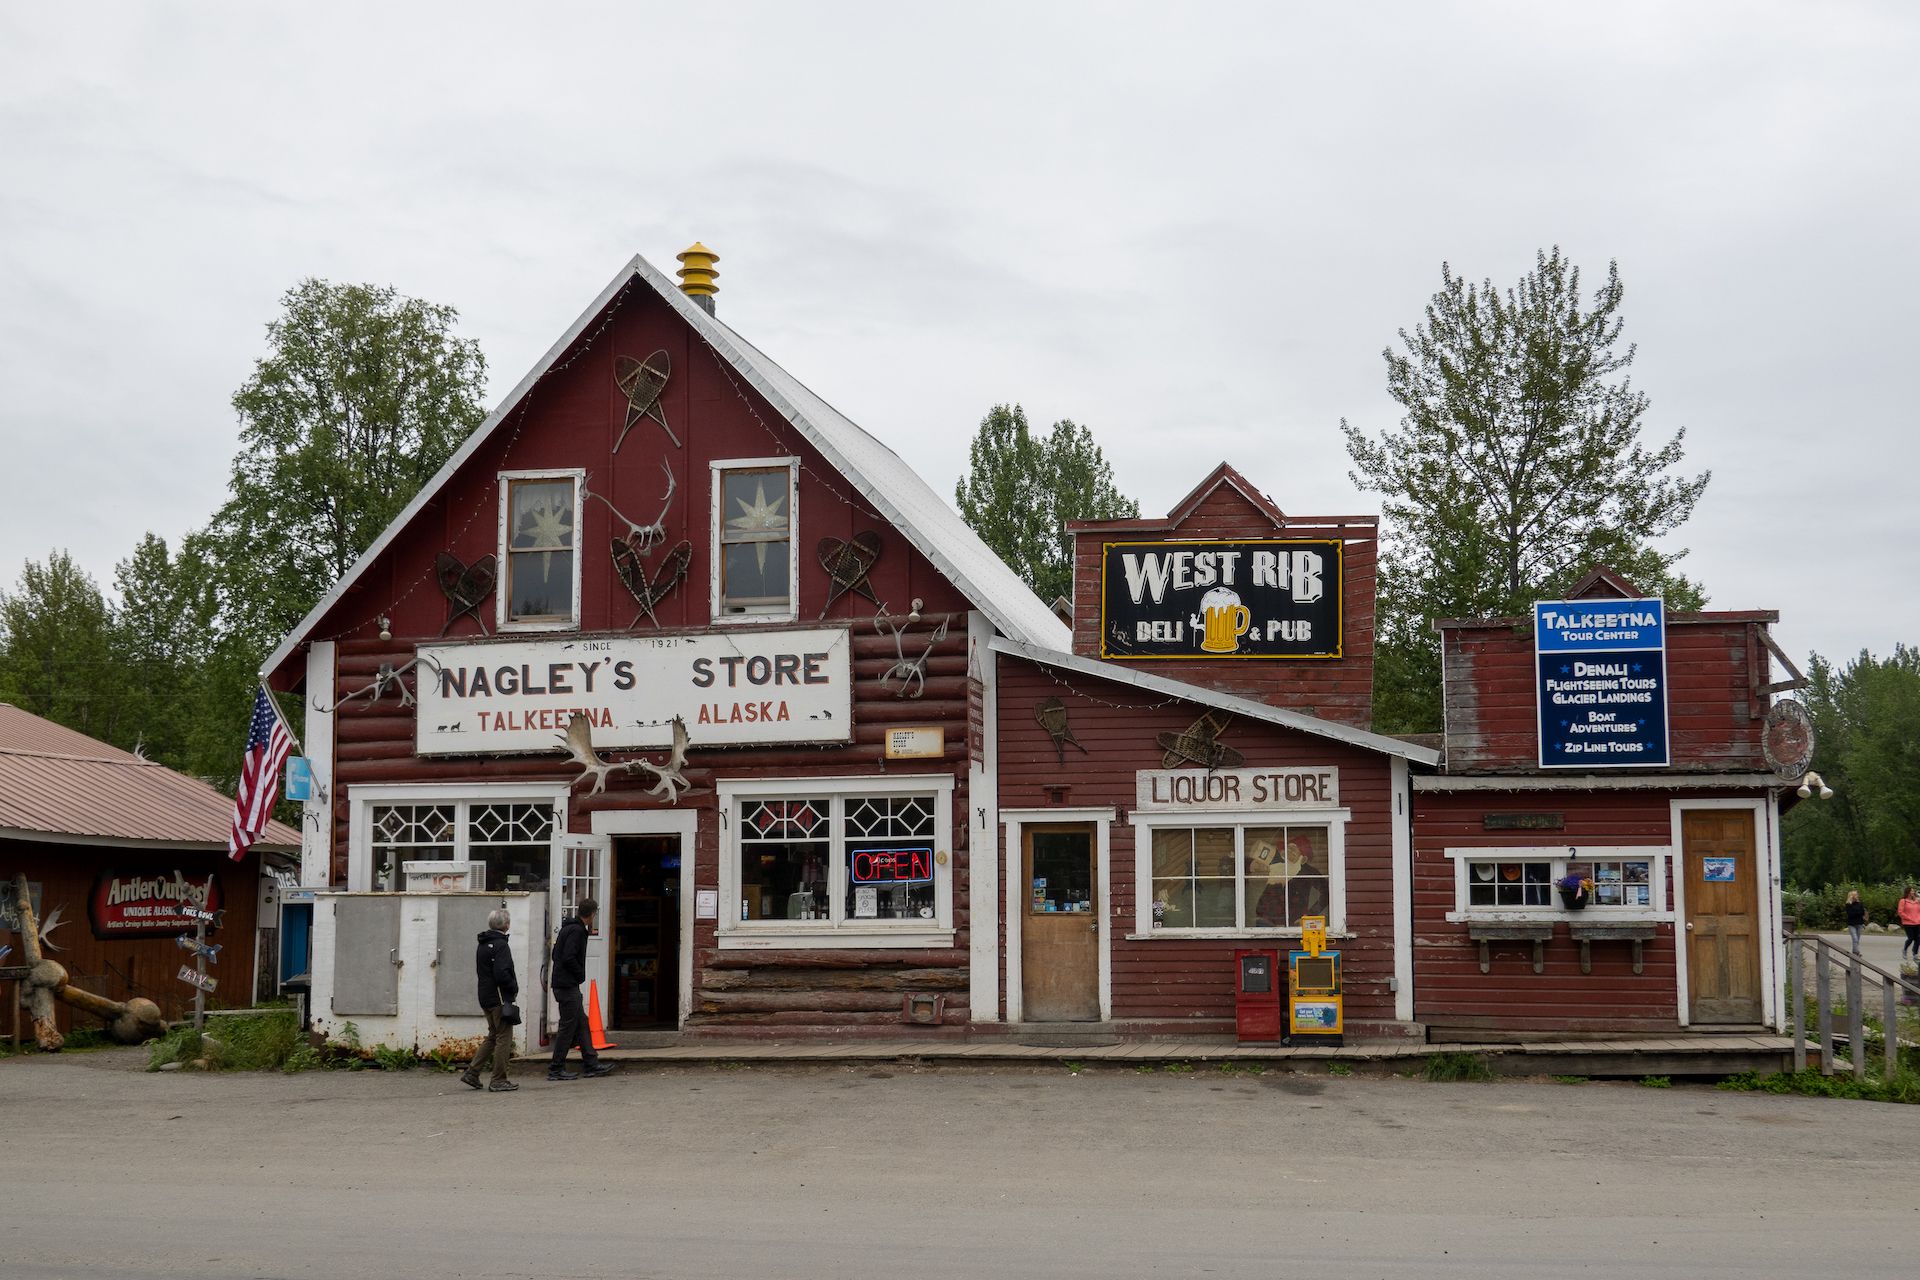 The Nagley’s Store is perhaps the most iconic building in town.